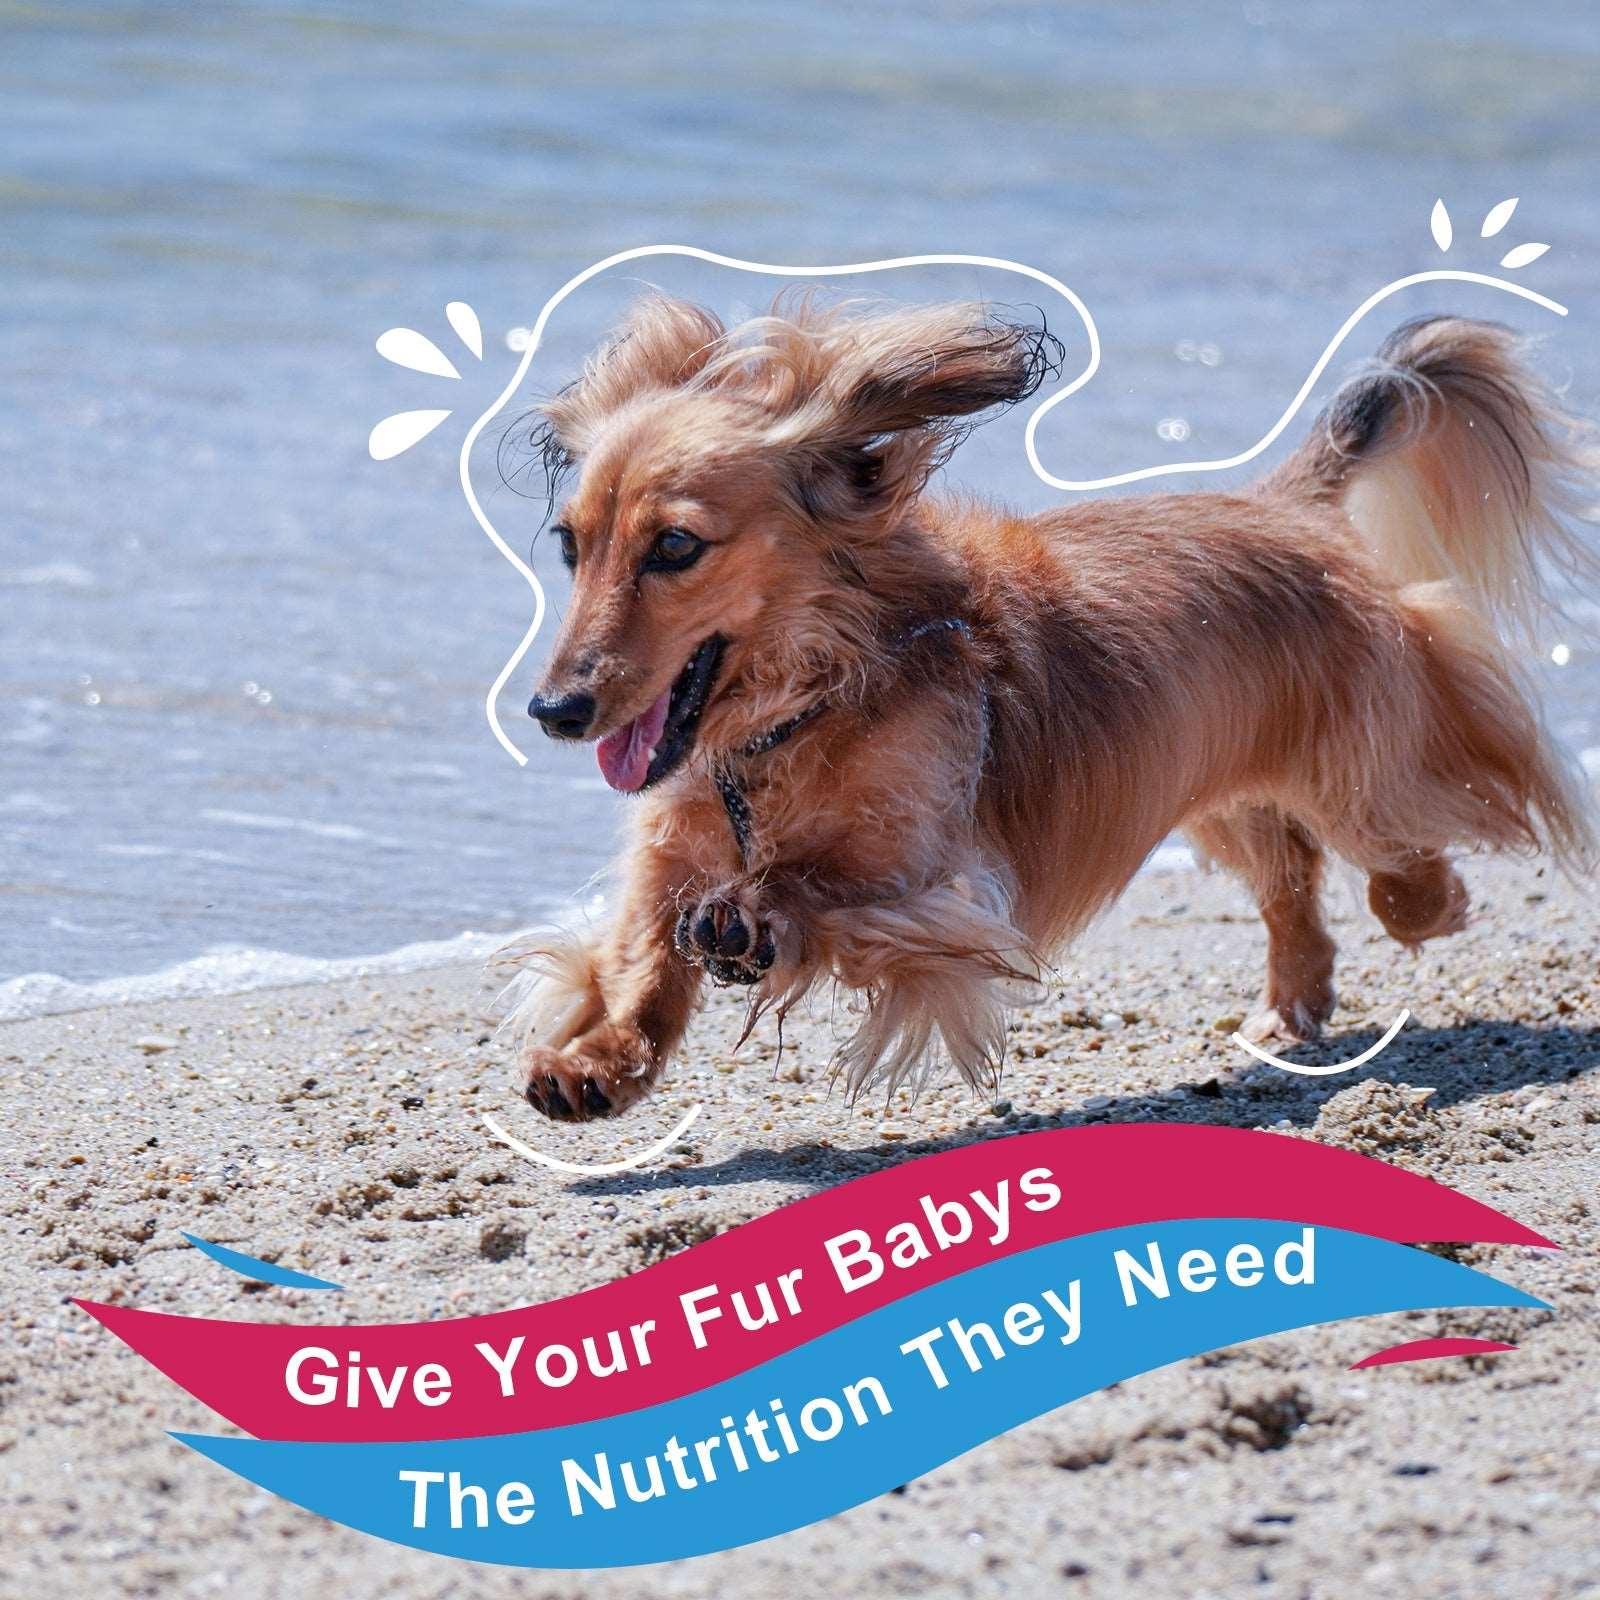 Vitamins Powder protects your dog's health